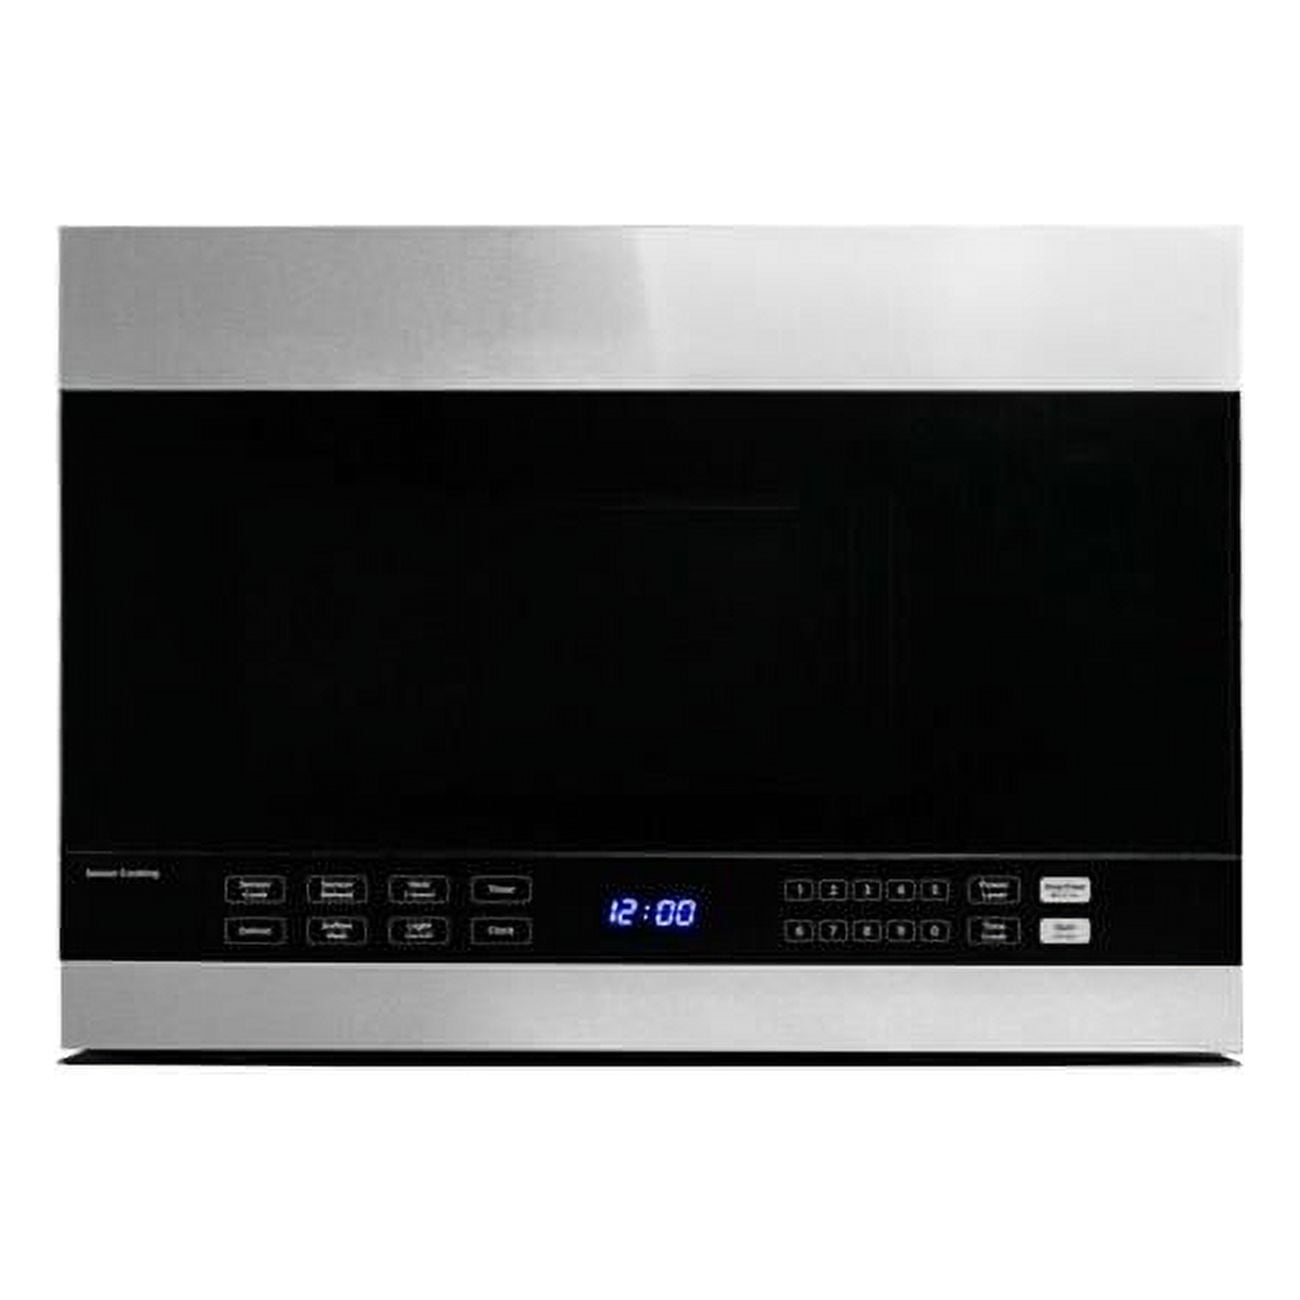 UPC 067638000260 product image for DOM014401G1 1.4 cu. ft. Over The Range Microwave Oven - Stainless Steel | upcitemdb.com